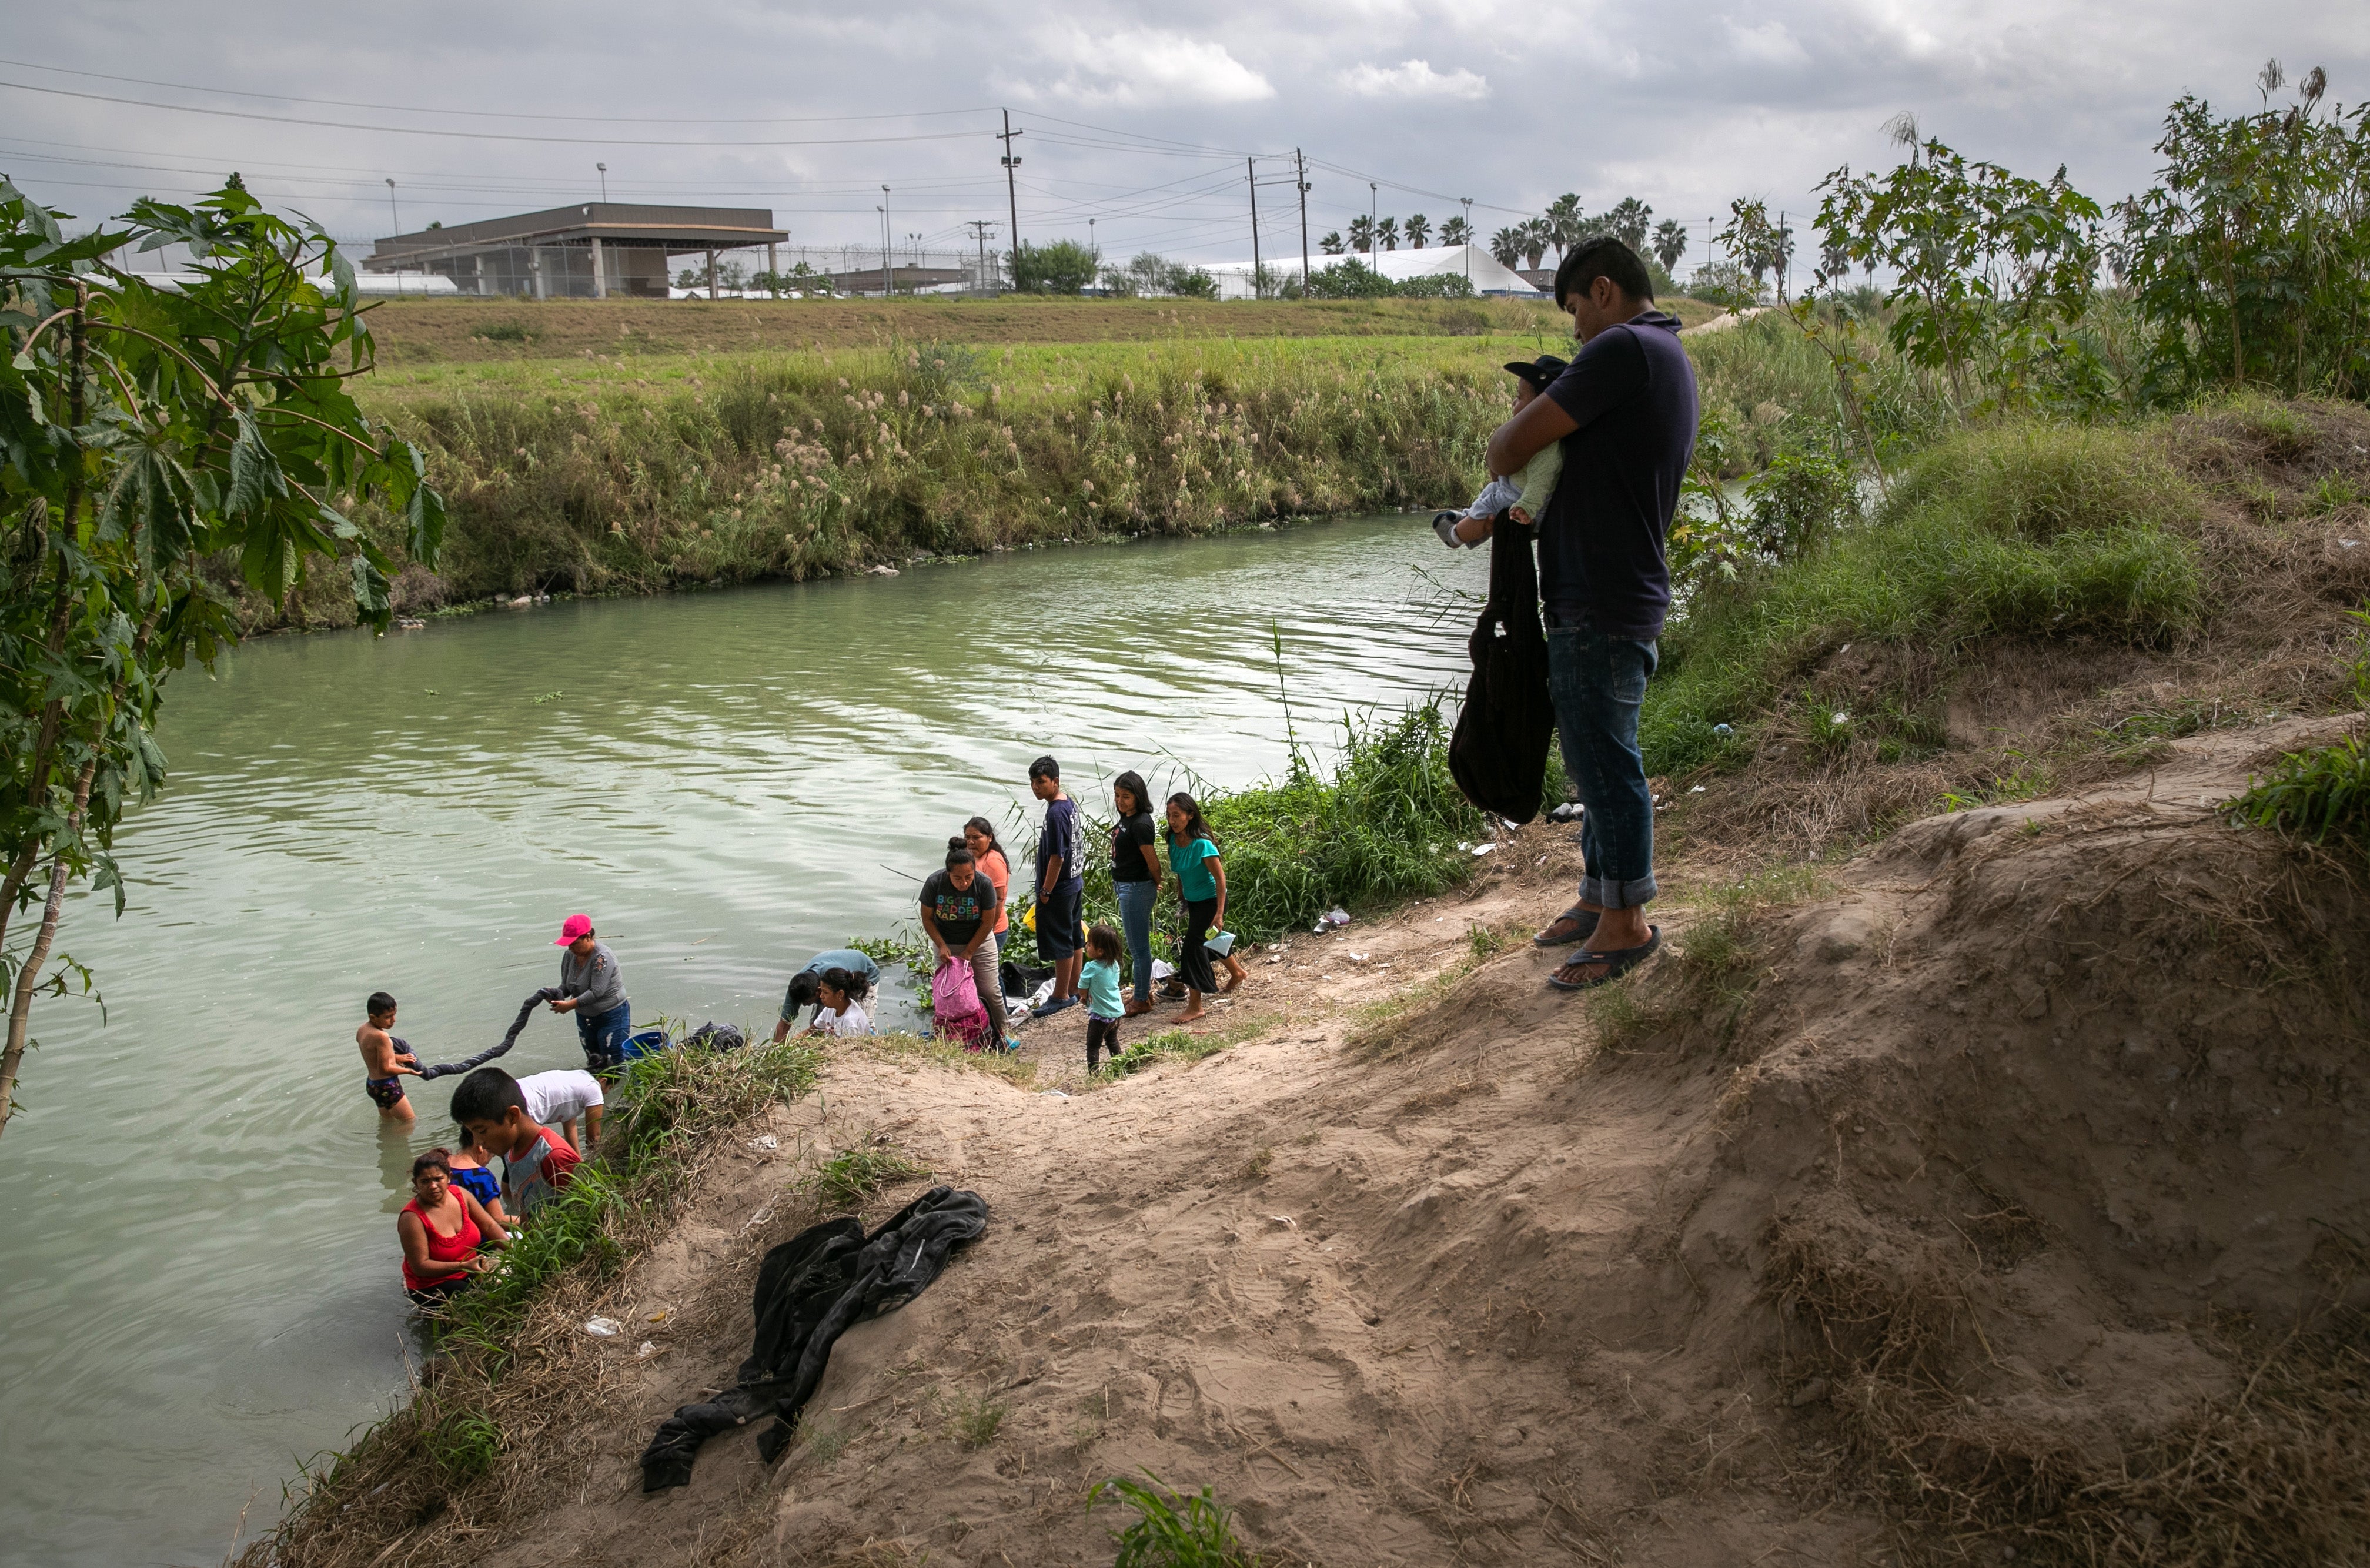 Many asylum seekers have been forced to live in makeshift tent encampments along the Mexican side of the border